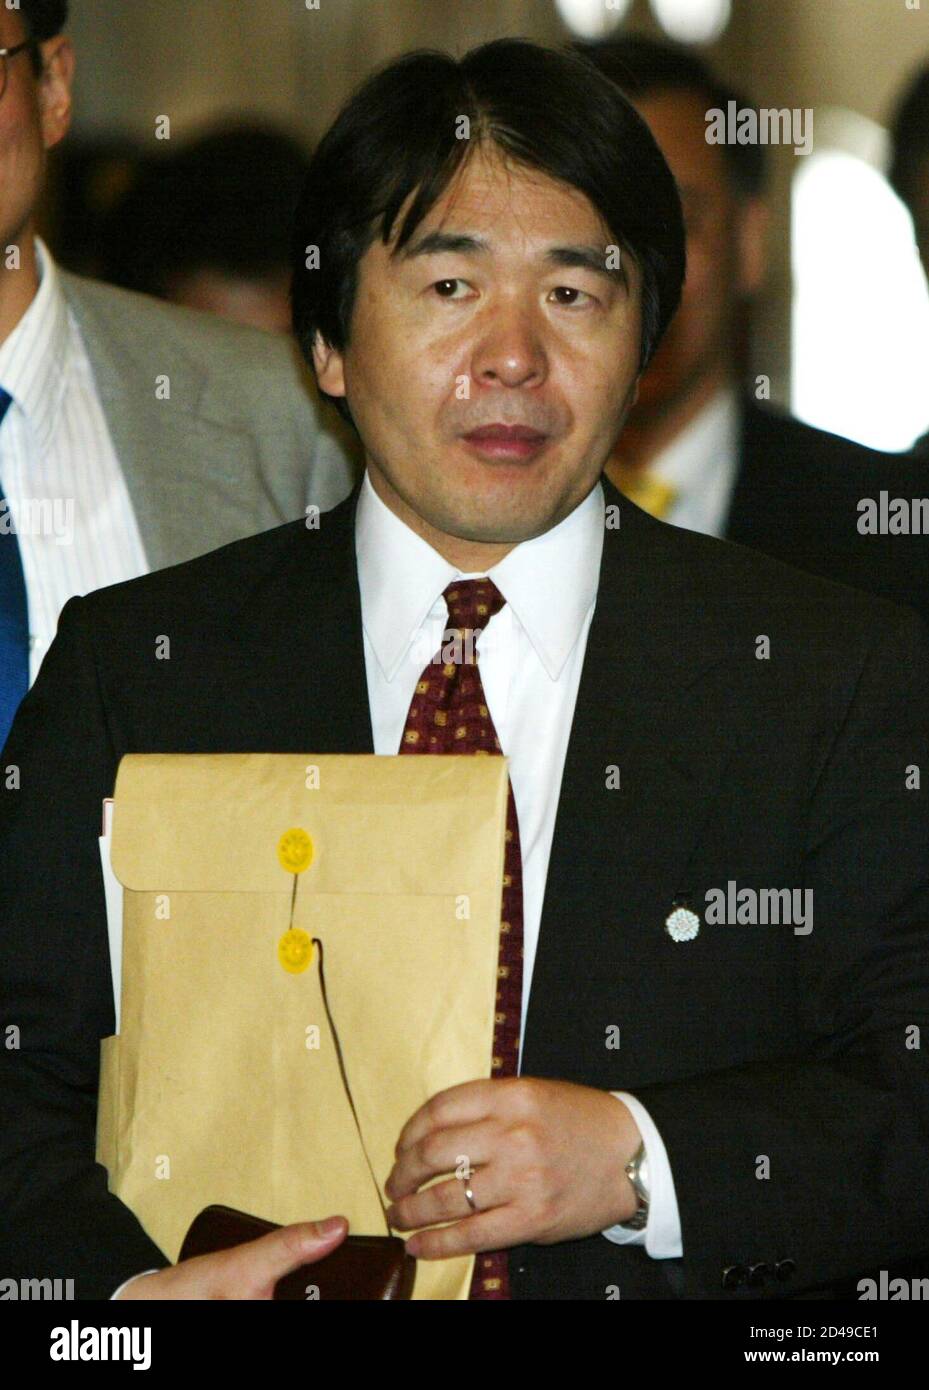 Japanese Financial Services Minister Heizo Takenaka enters parliament in Tokyo October 23, 2002. Japan's opposition parties will submit a no-confidence motion against chief banking regulator Heizo Takenaka on Tursday, oppostion party sources said. REUTERS/Kimimasa Mayama  TA/DL Stock Photo